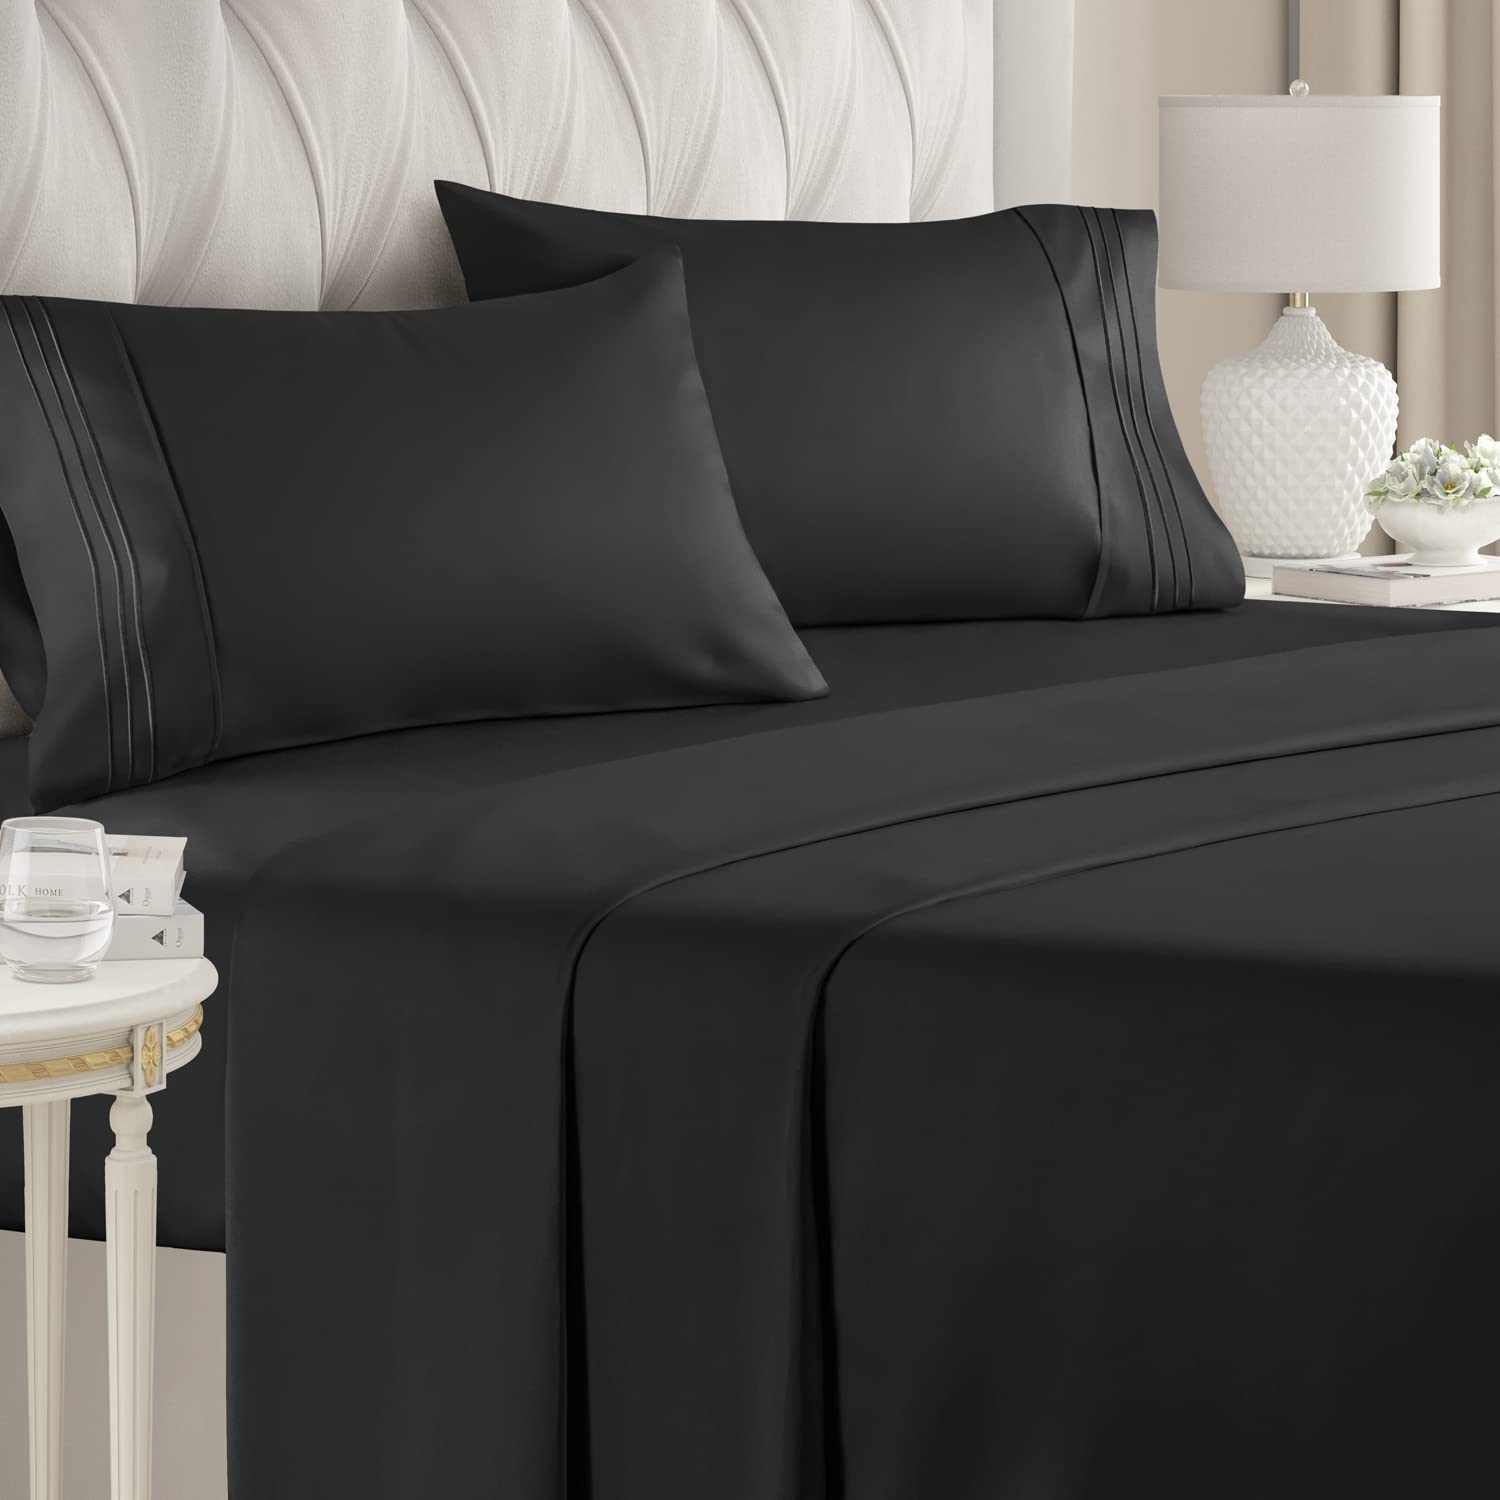 Book Cover California King Size Sheet Set - Breathable & Cooling Sheets - Hotel Luxury Bed Sheets - Extra Soft - Deep Pockets - 4 Piece Set - Wrinkle Free - Comfy - Black Bed Sheets - Cali Kings Sheets 4 PC 24 - Black California King